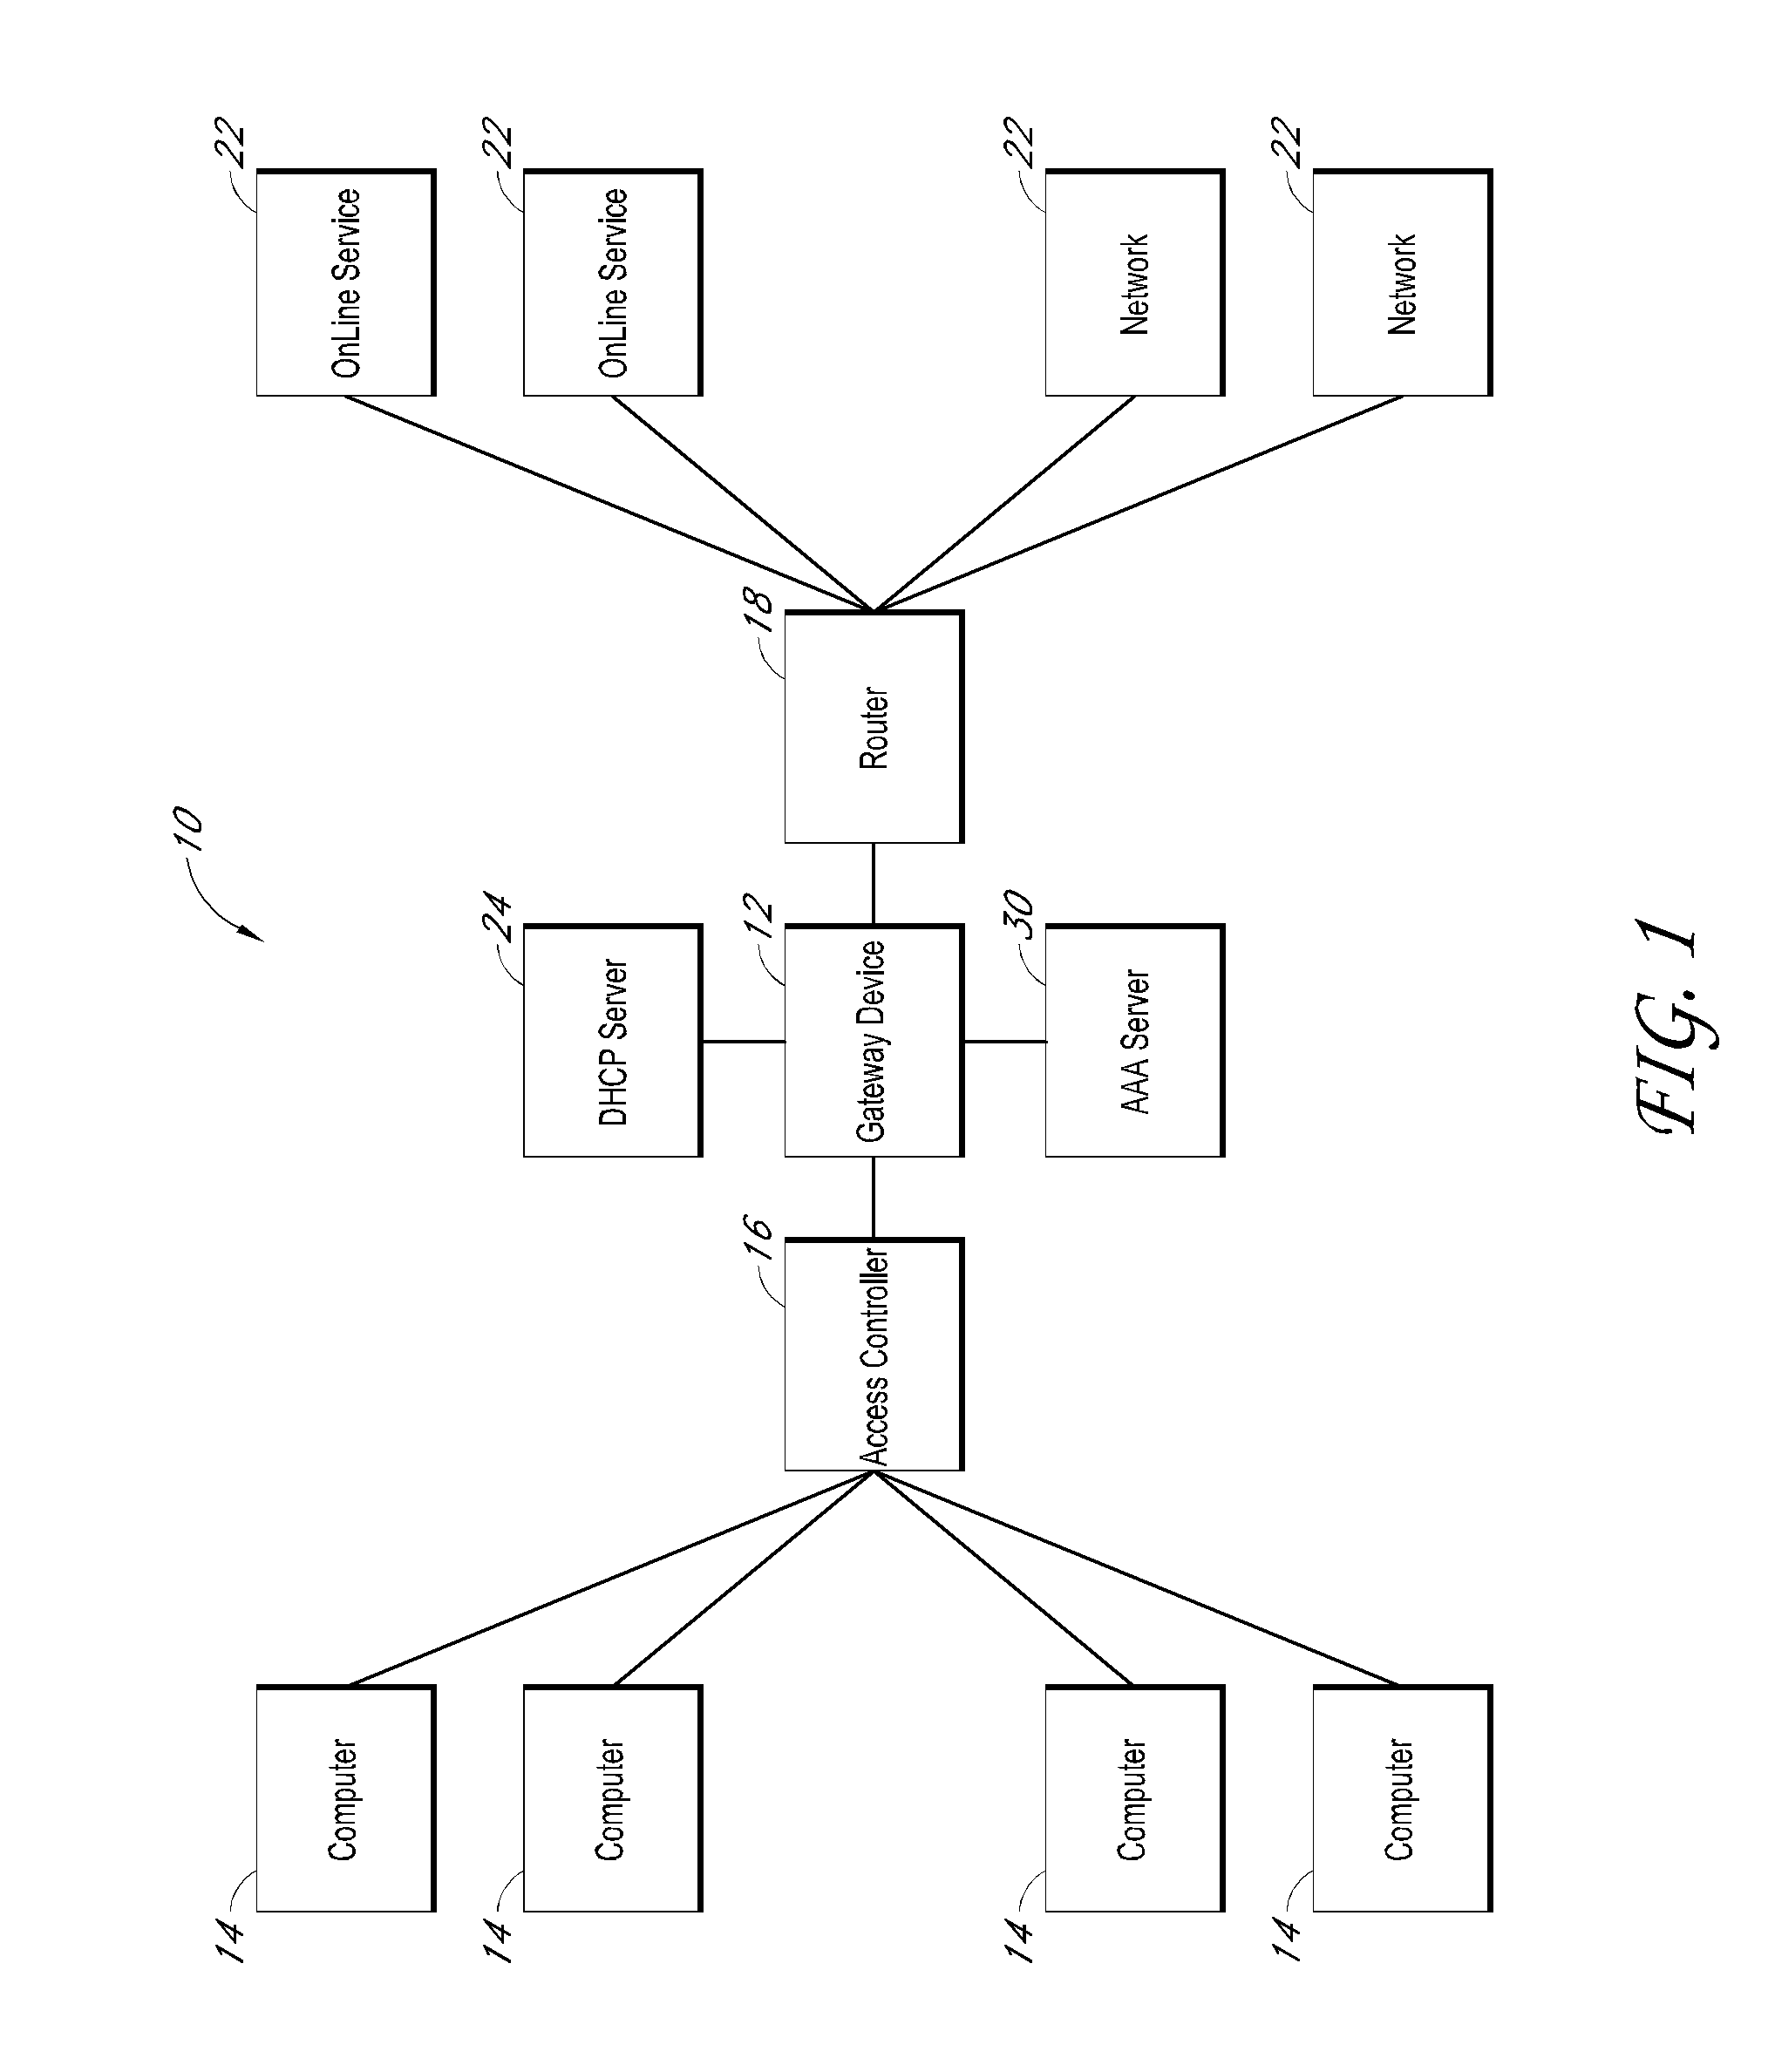 Systems and methods for providing content and services on a network system